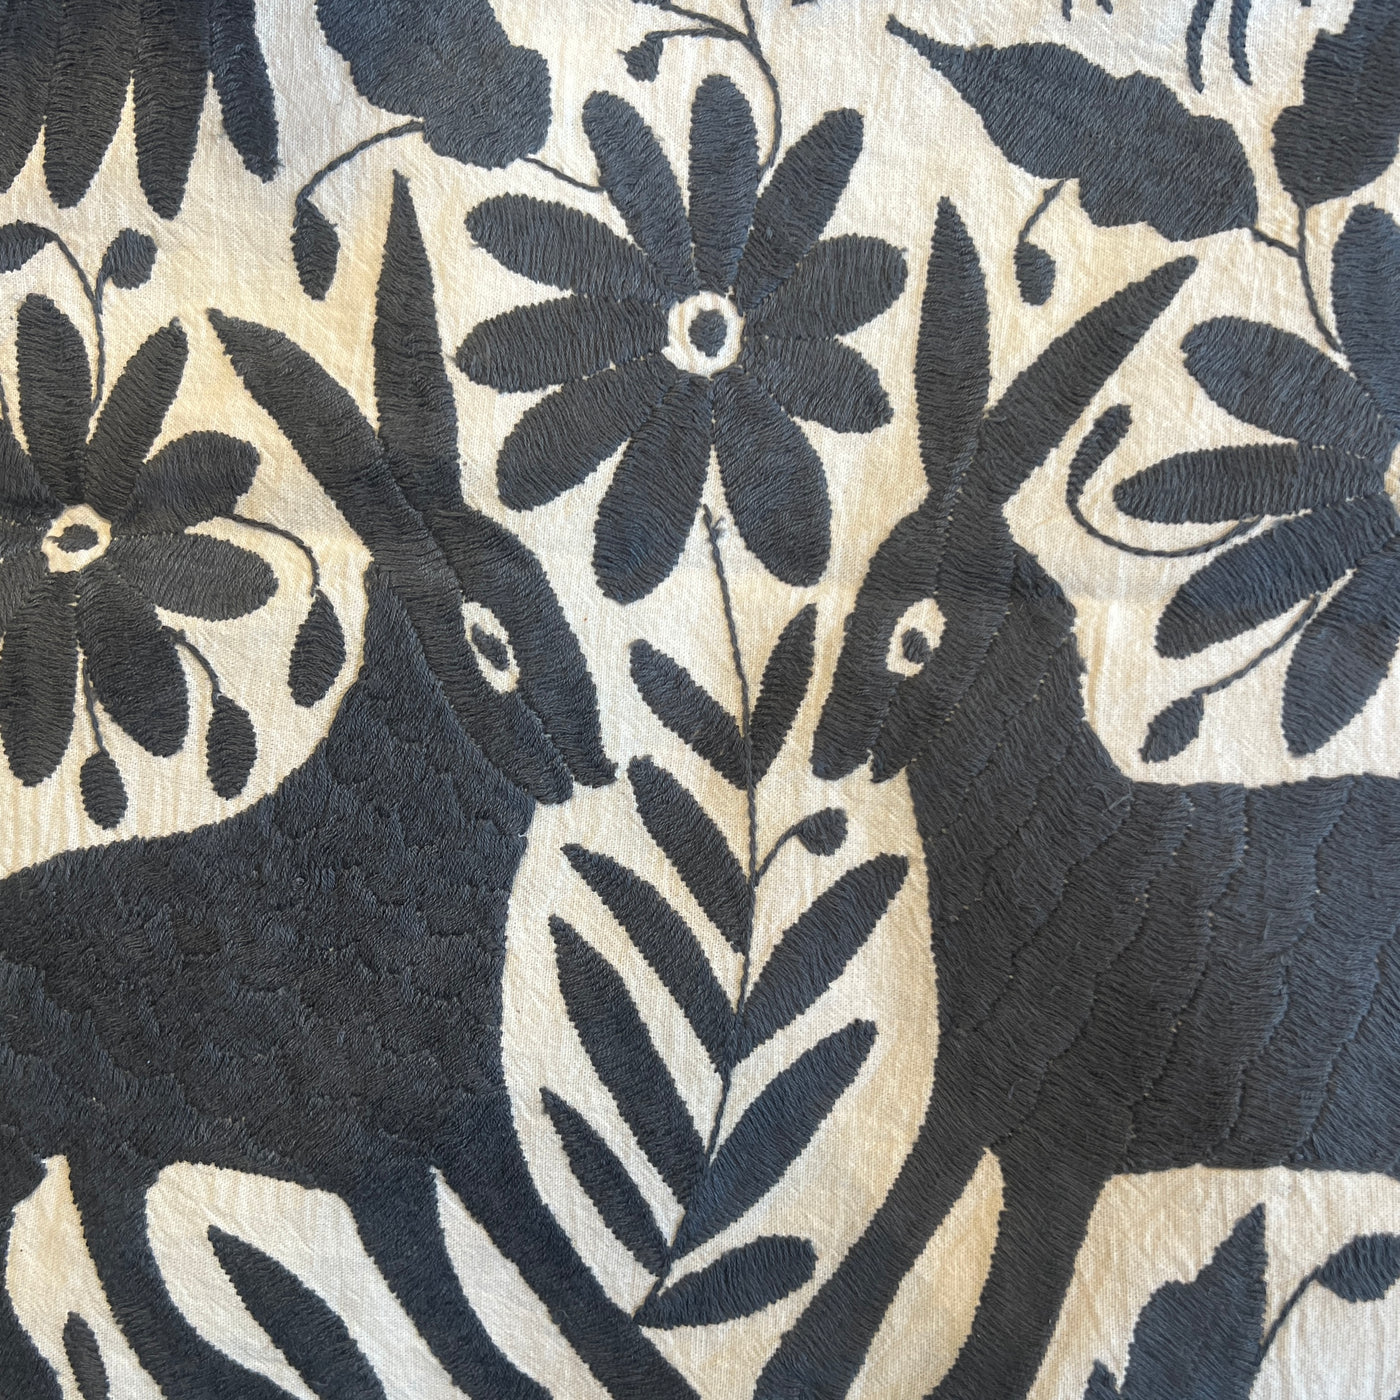 enhanced view of dark gray floral and fauna scenery detail embroidered on off white table runner